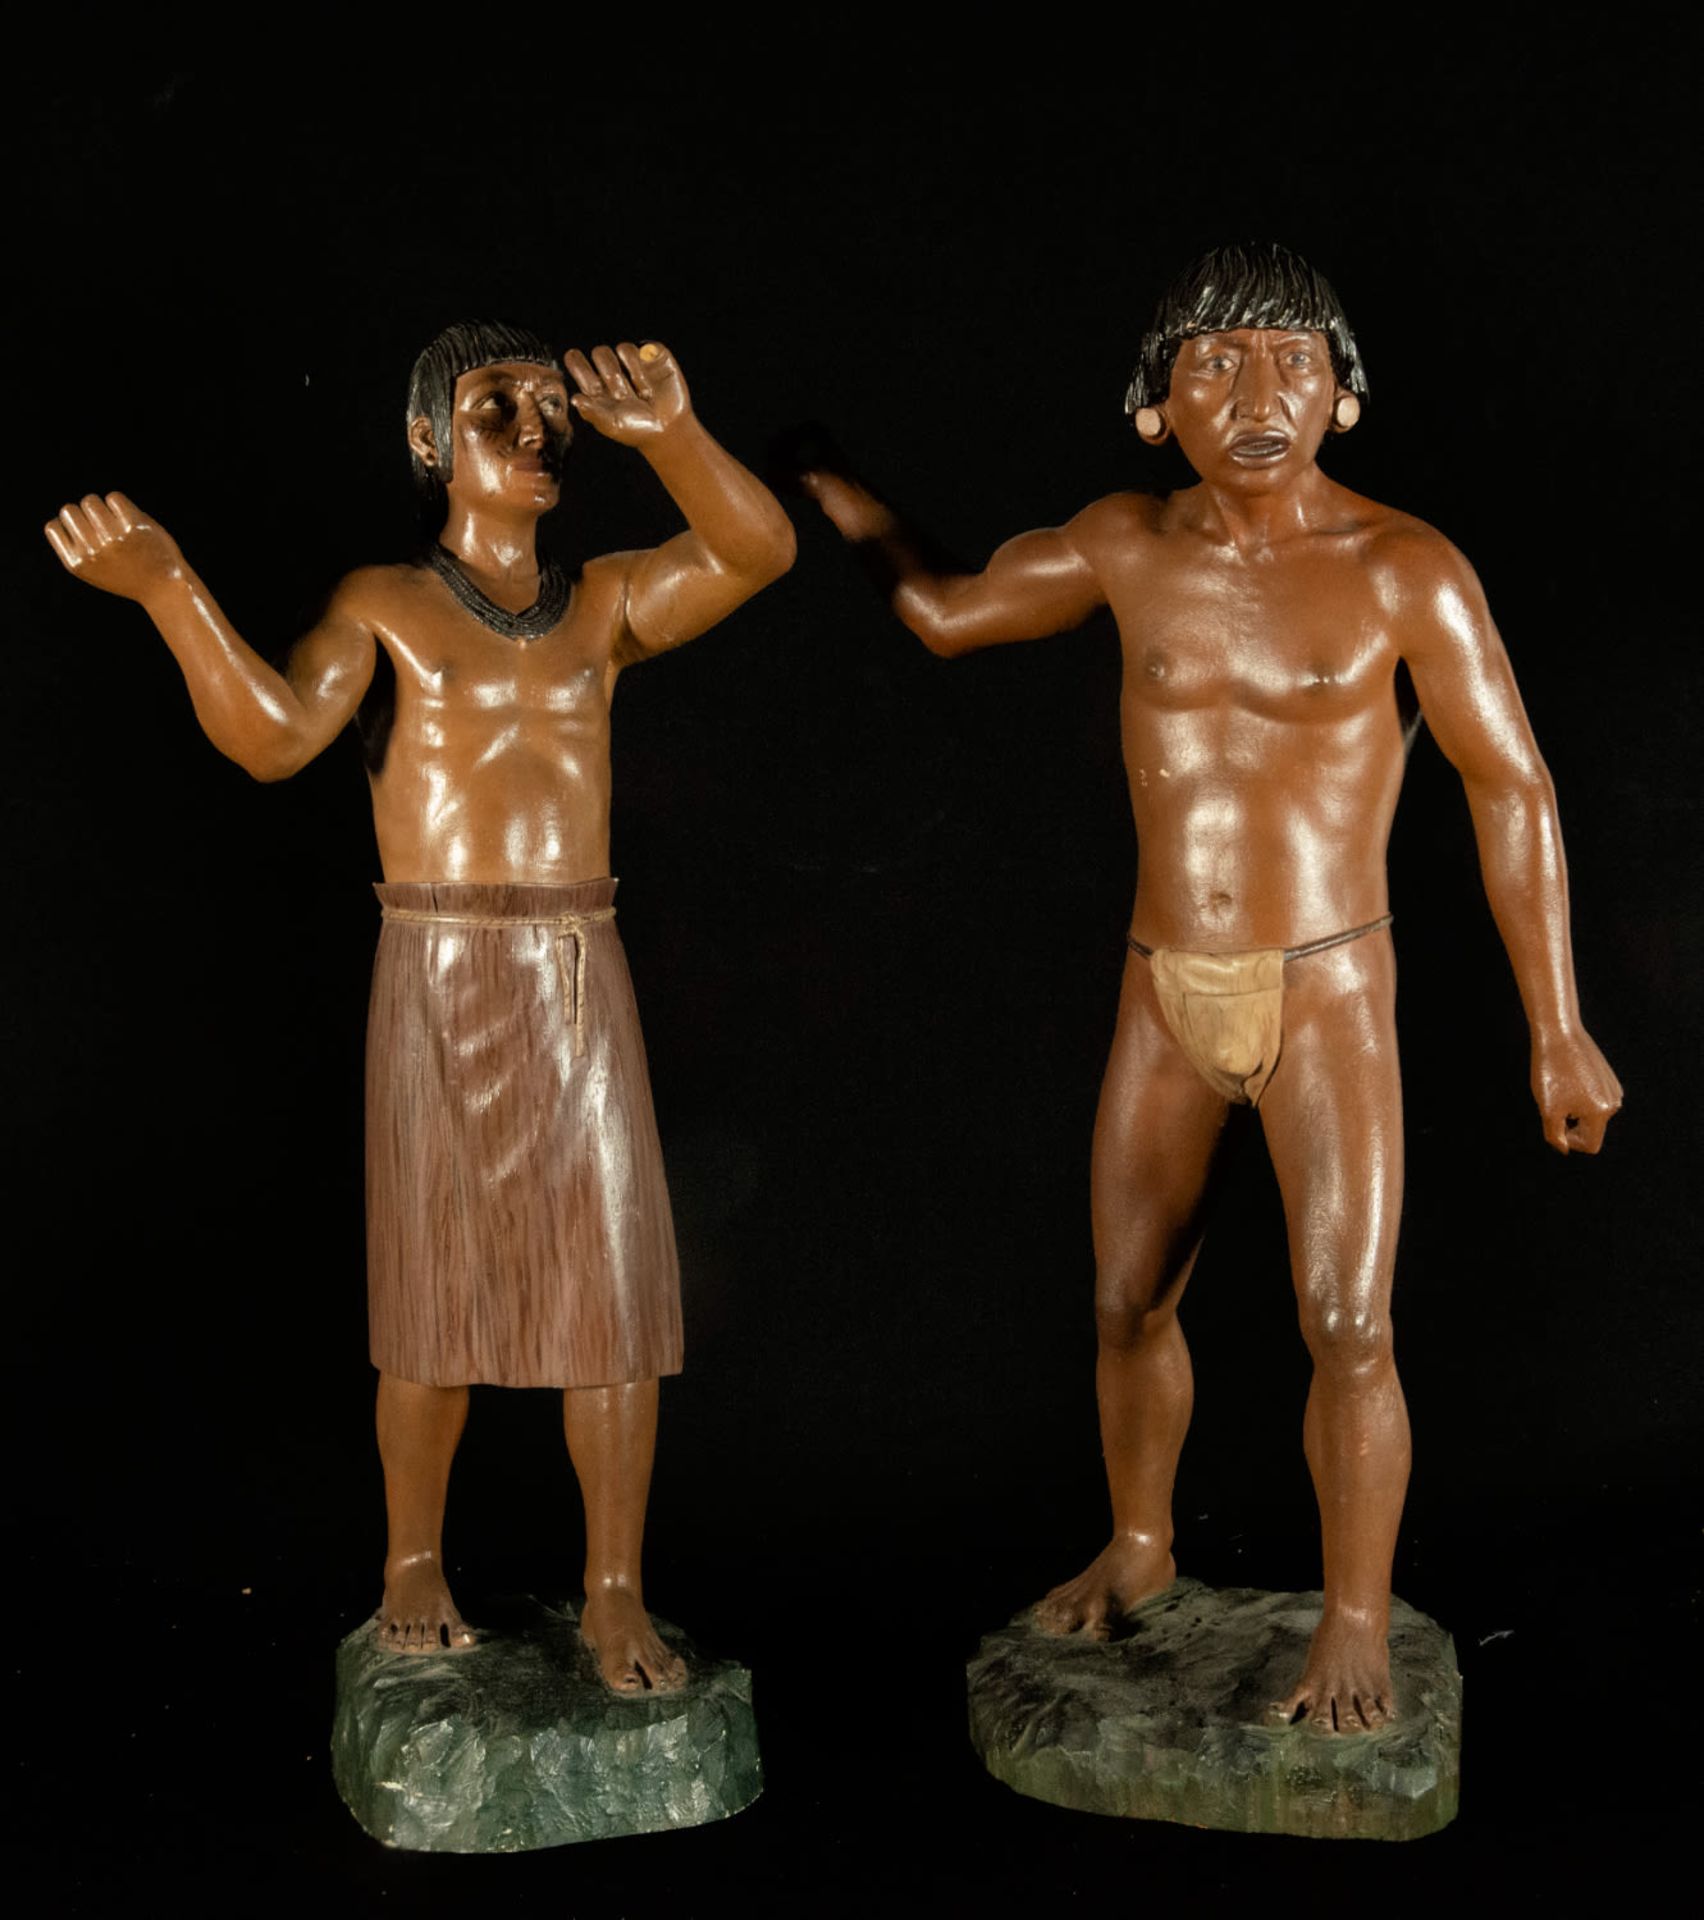 Galo Tobar, year 1974, Pair of exquisite sculptures of Matsés Indians from Brazil, 70s